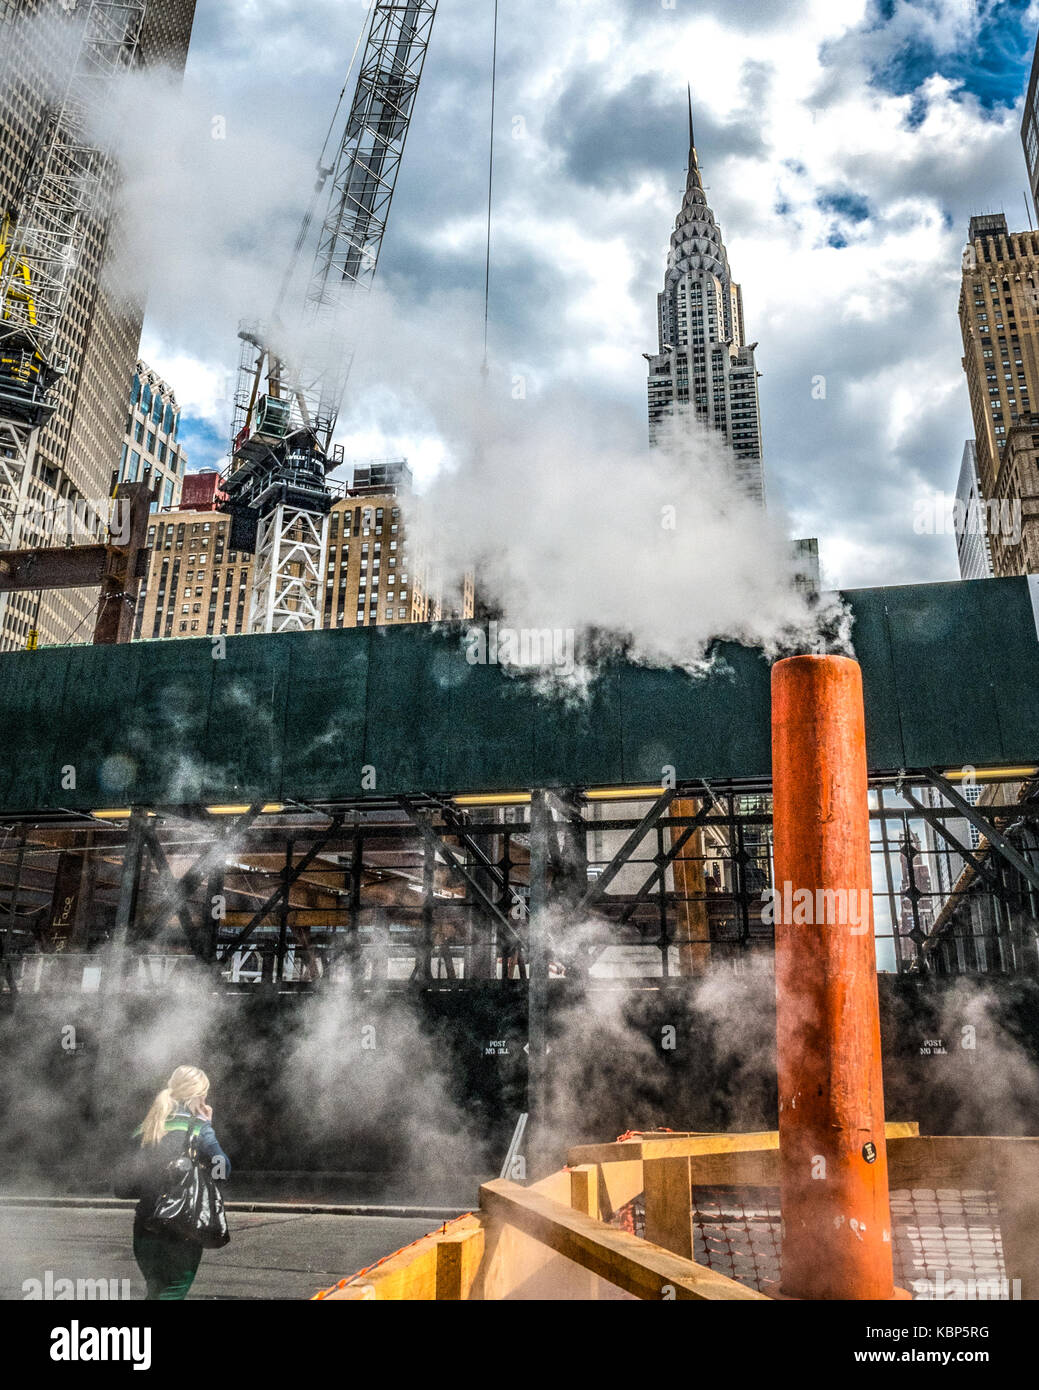 New York, USA,  29 September, 2017. Pedestrians cross the street among vapor fumes in front of Chrysler building in midtown New York City. Photo by En Stock Photo